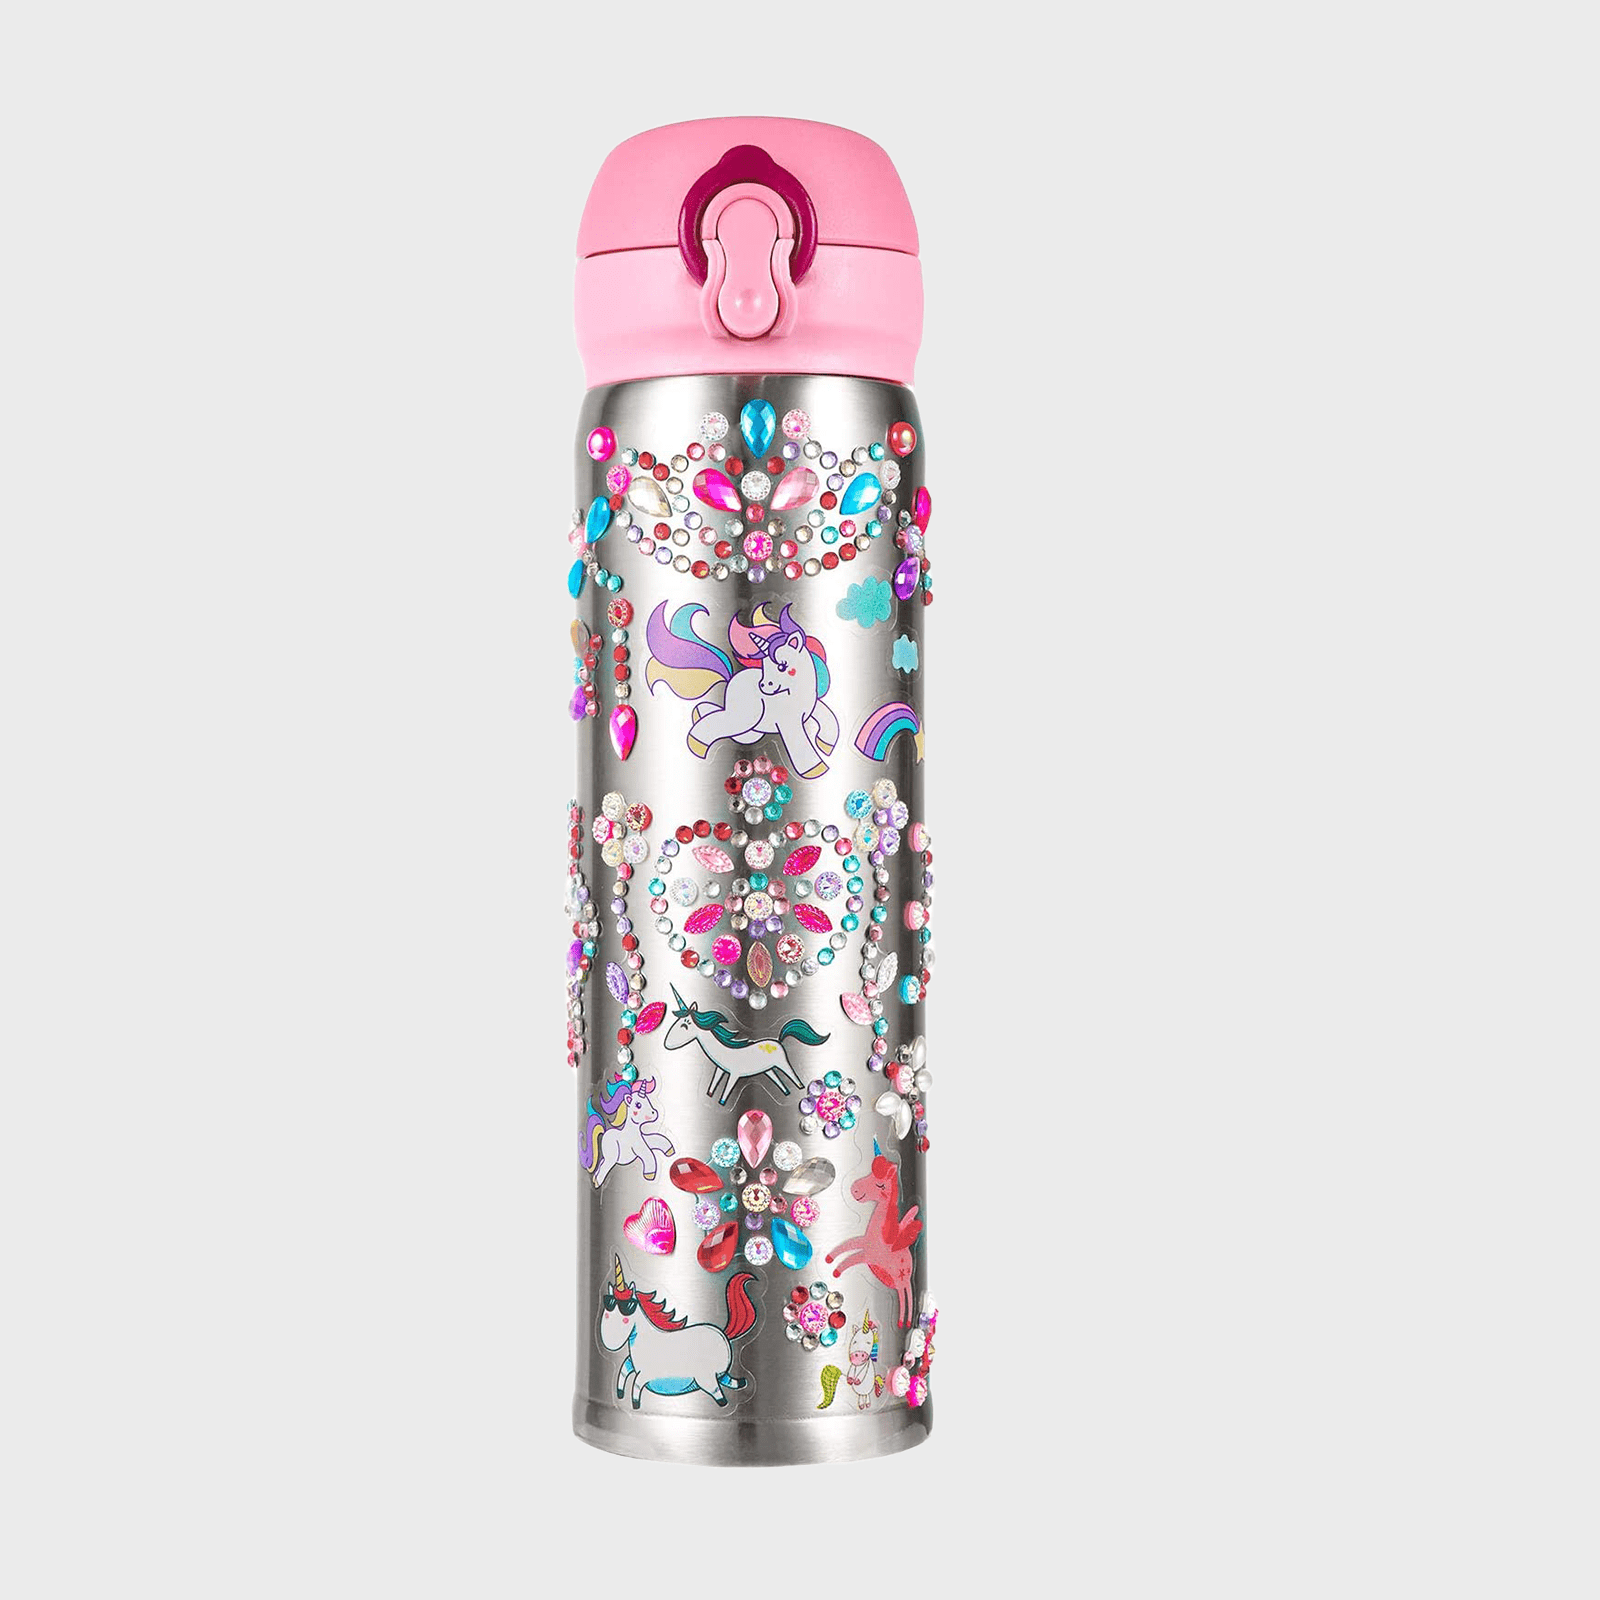 YOFUN Decorate Your Own Water Bottle with 11 Sheets of Unicorn Stickers & Glitter Gems, Craft Kit & Art Kit for Children, Gift for Girls Age 4 5 6 7